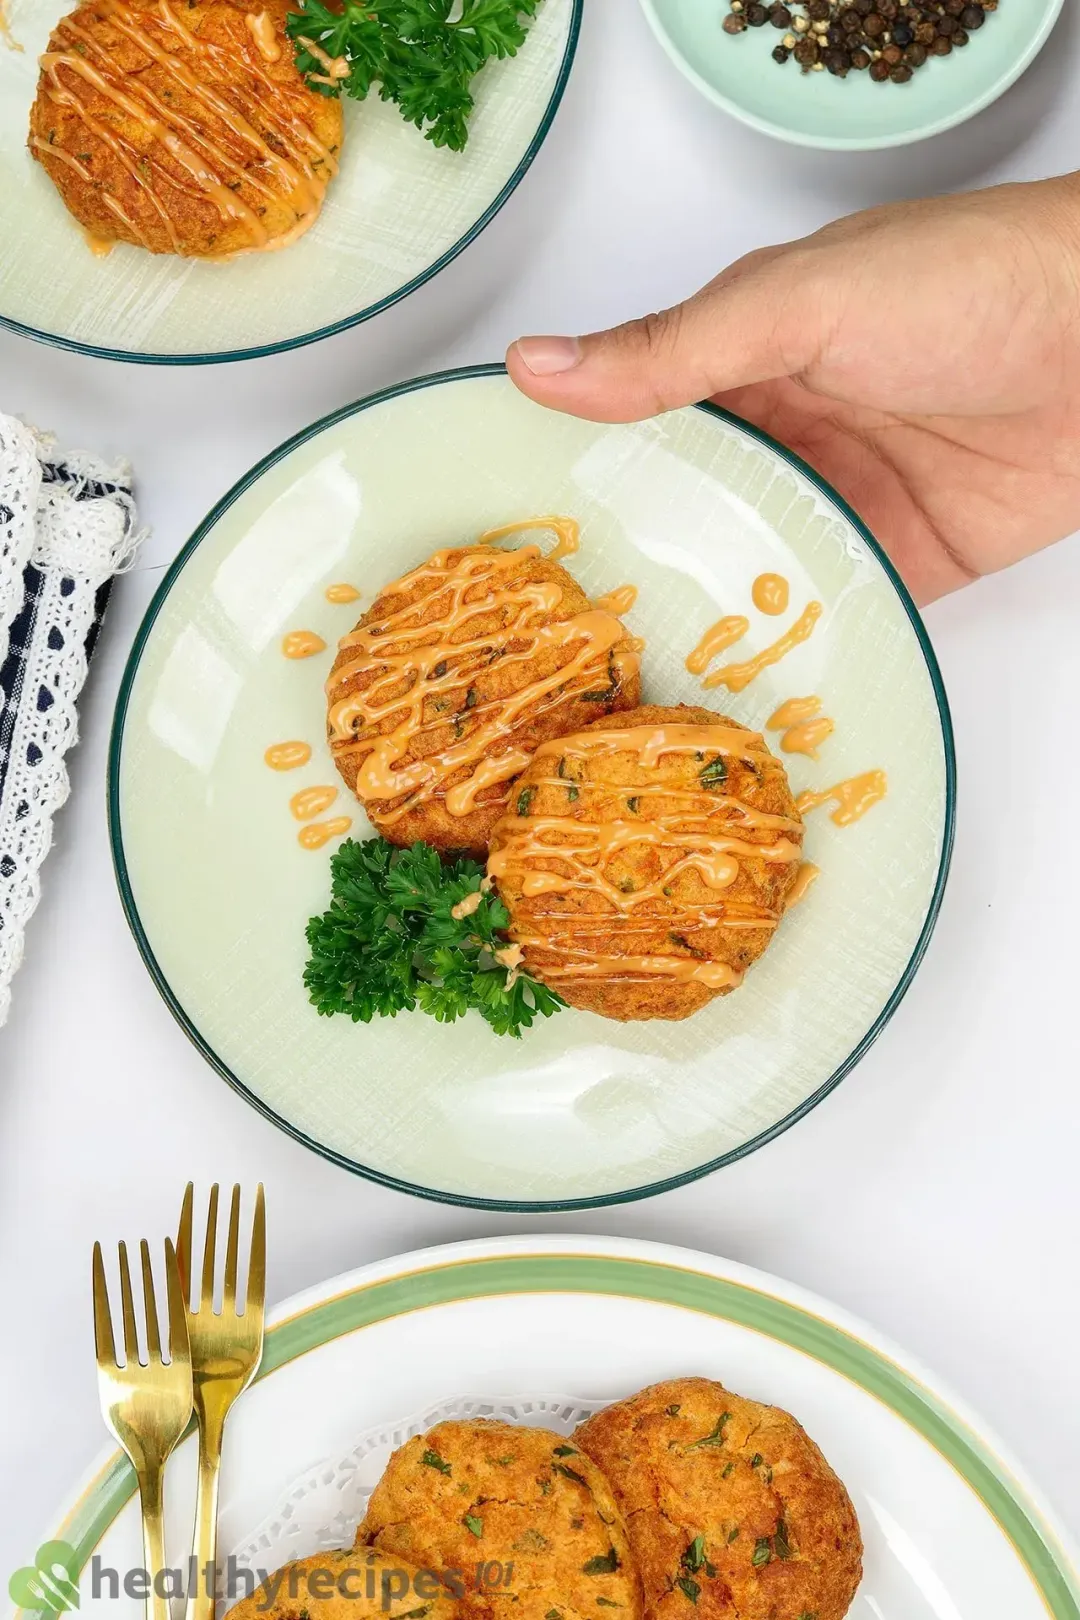 A hand holding a plate of two air fryer salmon patties drizzled with sauce and garnished with some parsley.